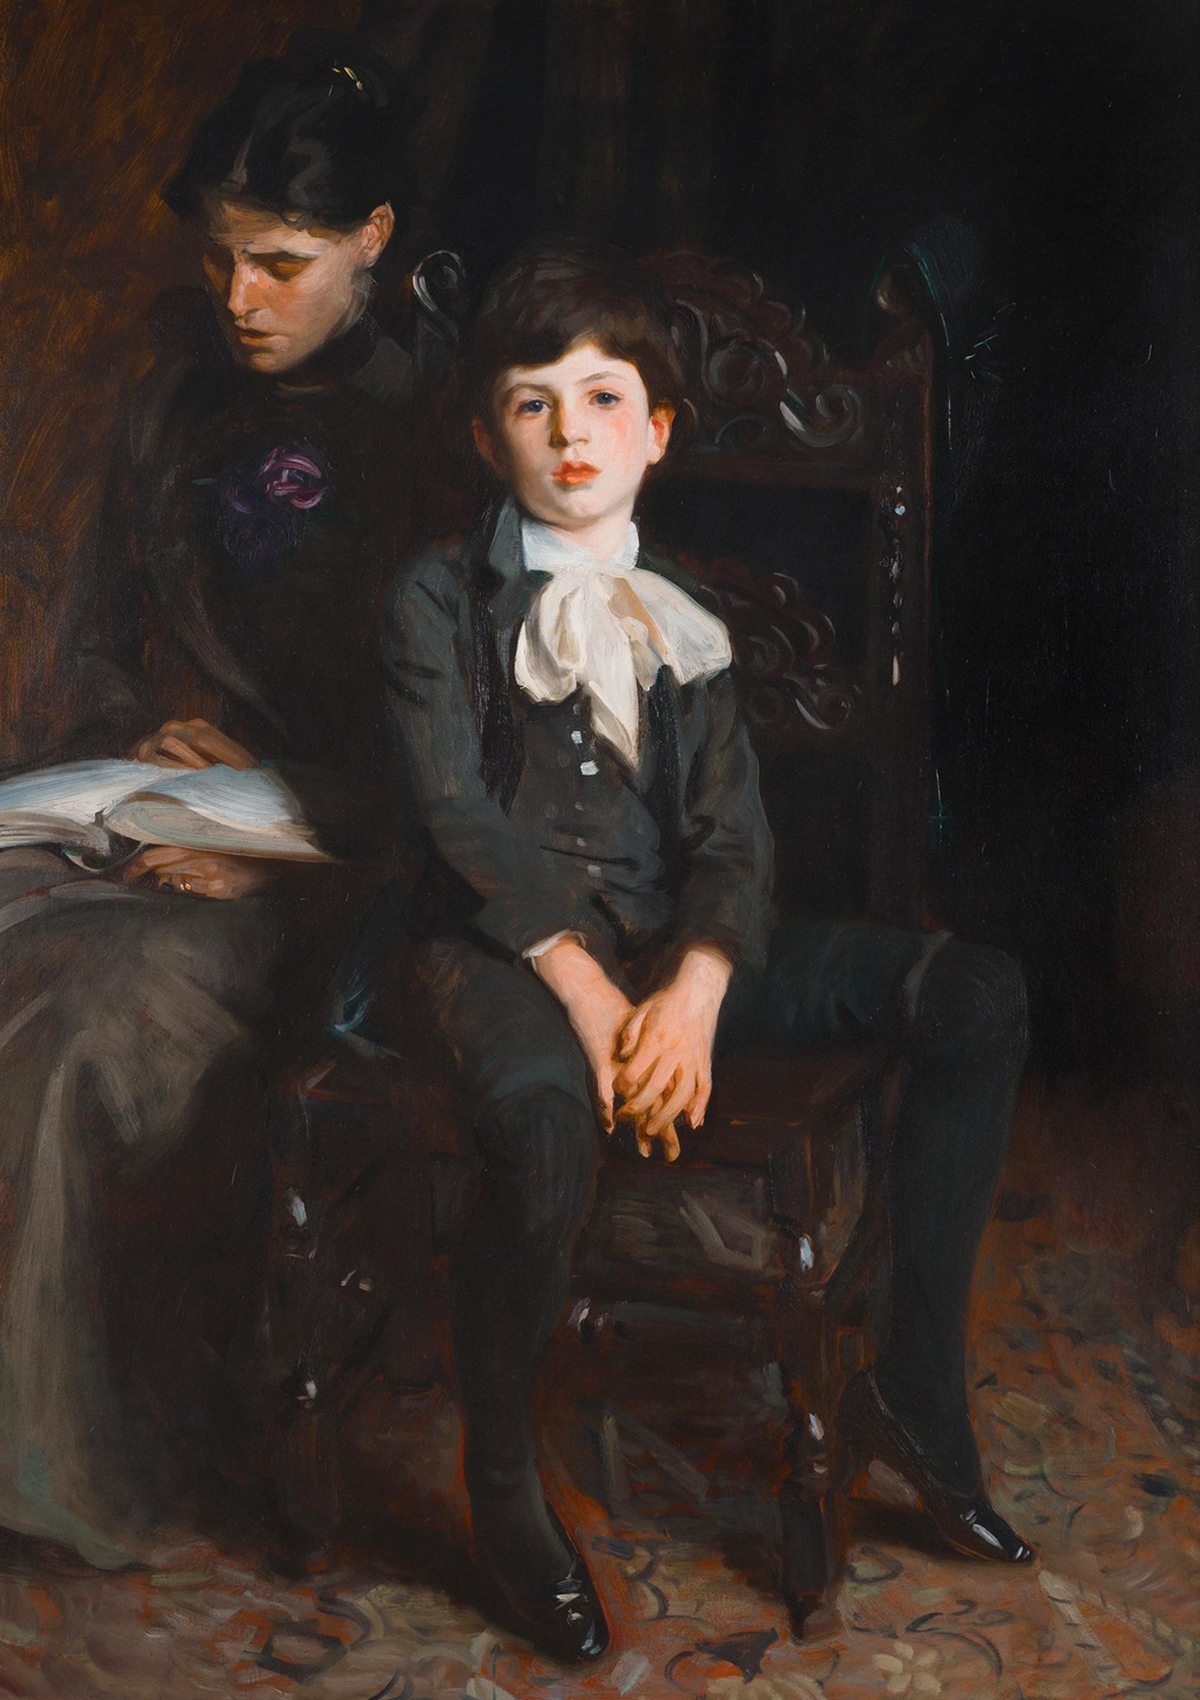 Painting of a young boy fancily dressed, sitting in a chair beside a woman reading